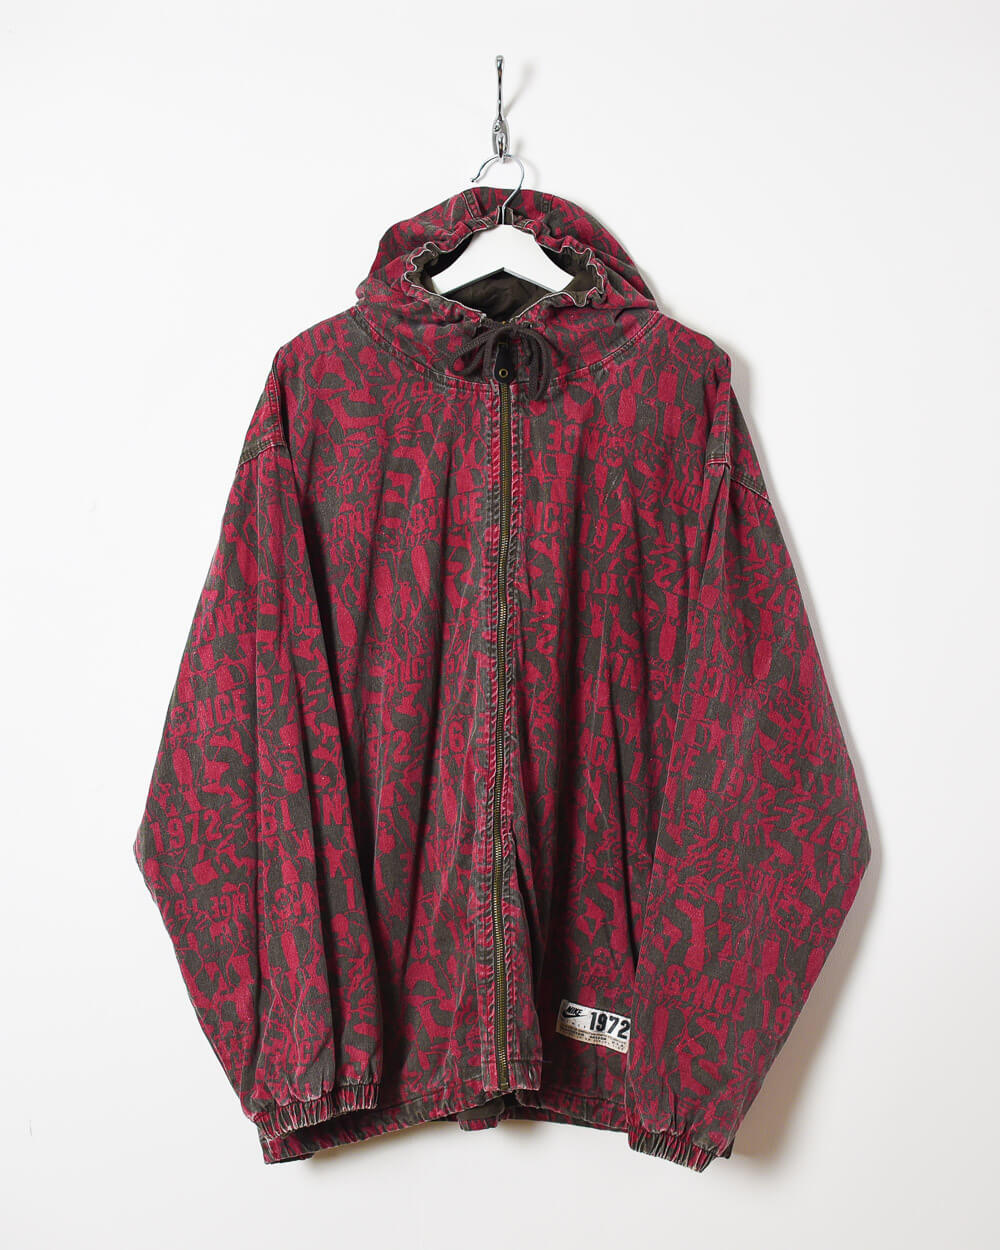 Pink Nike All Over Print Hooded Jacket - XX-Large